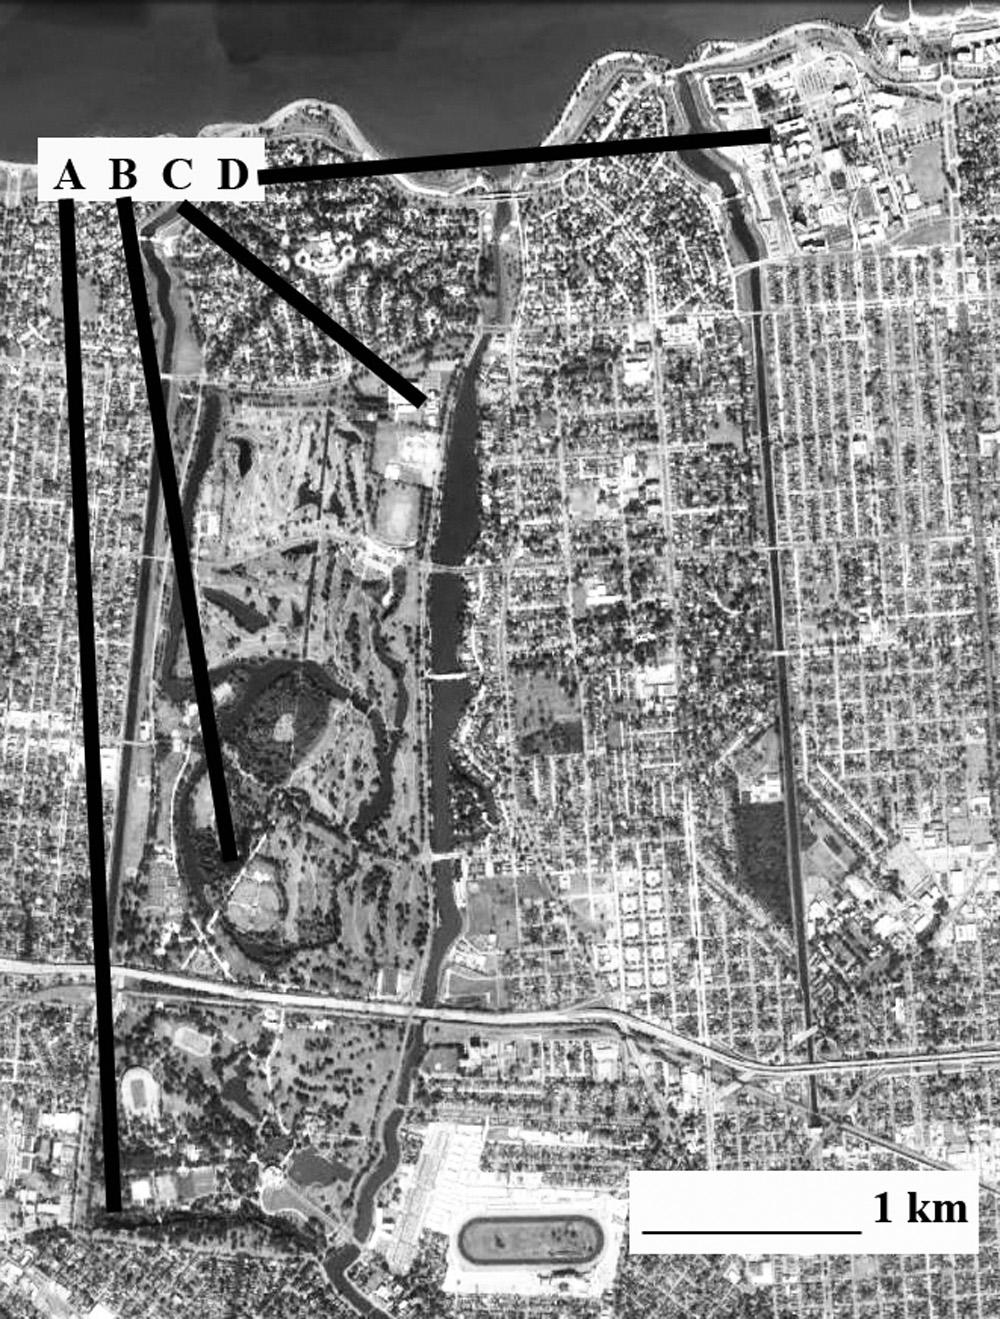 728 JOURNAL OF ECONOMIC ENTOMOLOGY Vol. 107, no. 2 Fig. 1. Extended map of Southern Regional Research Center, New Orleans, LA, indicating locations of Formosan termite colonies spot treated with 0.